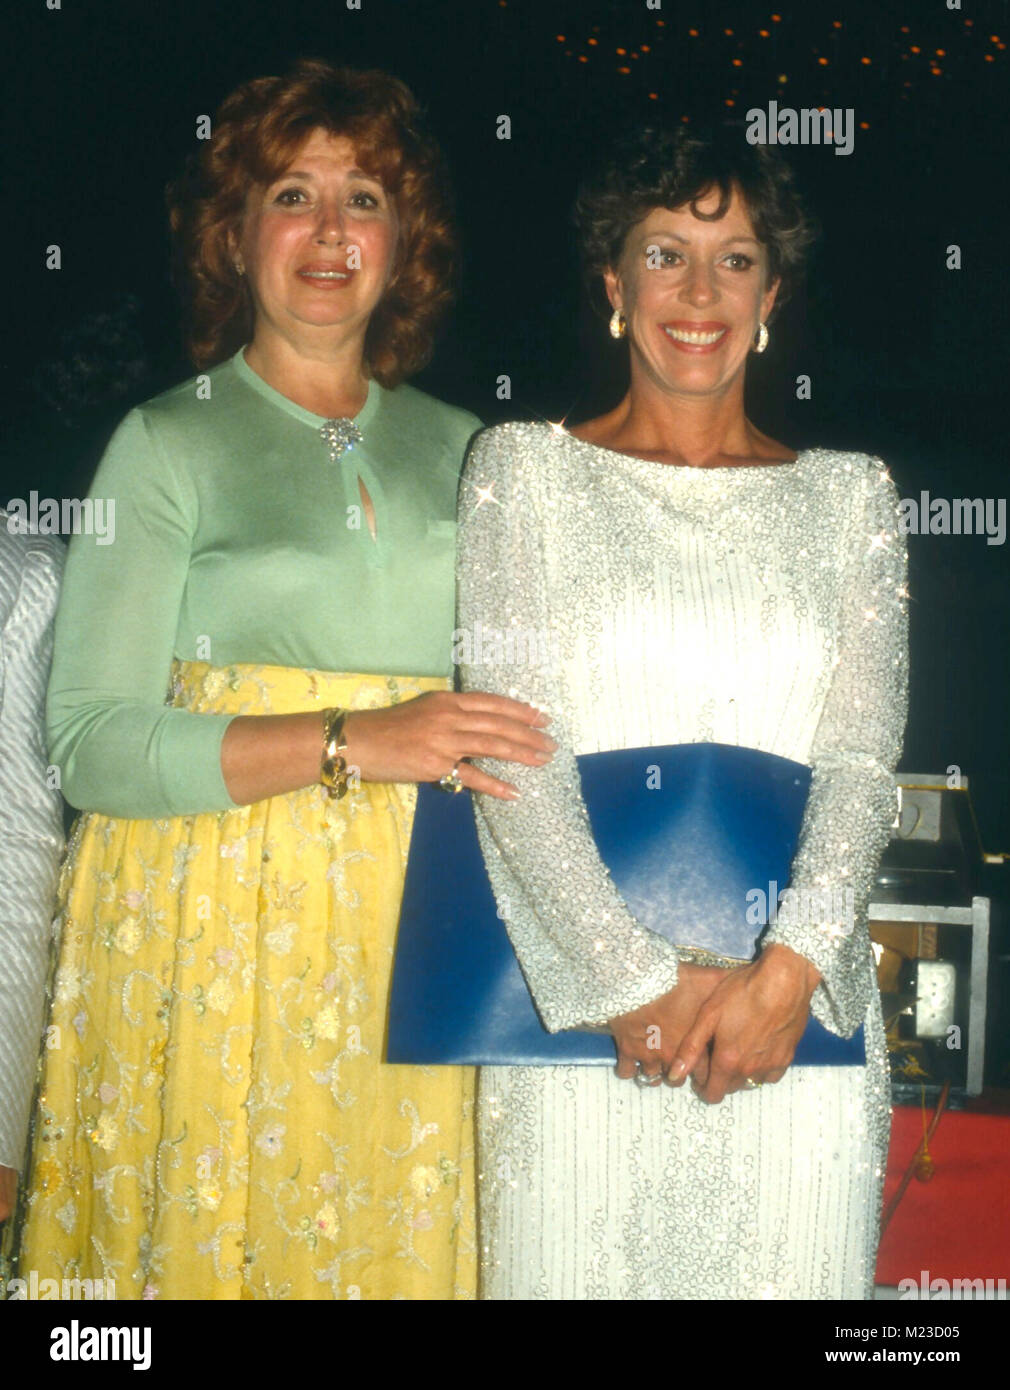 LOS ANGELES, CA - MAY 9: Opera singer Beverly Sills and Comedian/actress Carol Burnett attend event honoring Carol Burnett on May 9, 1981 at the Century Plaza Hotel in Los Angeles, California. Photo by Barry King/Alamy Stock Photo Stock Photo